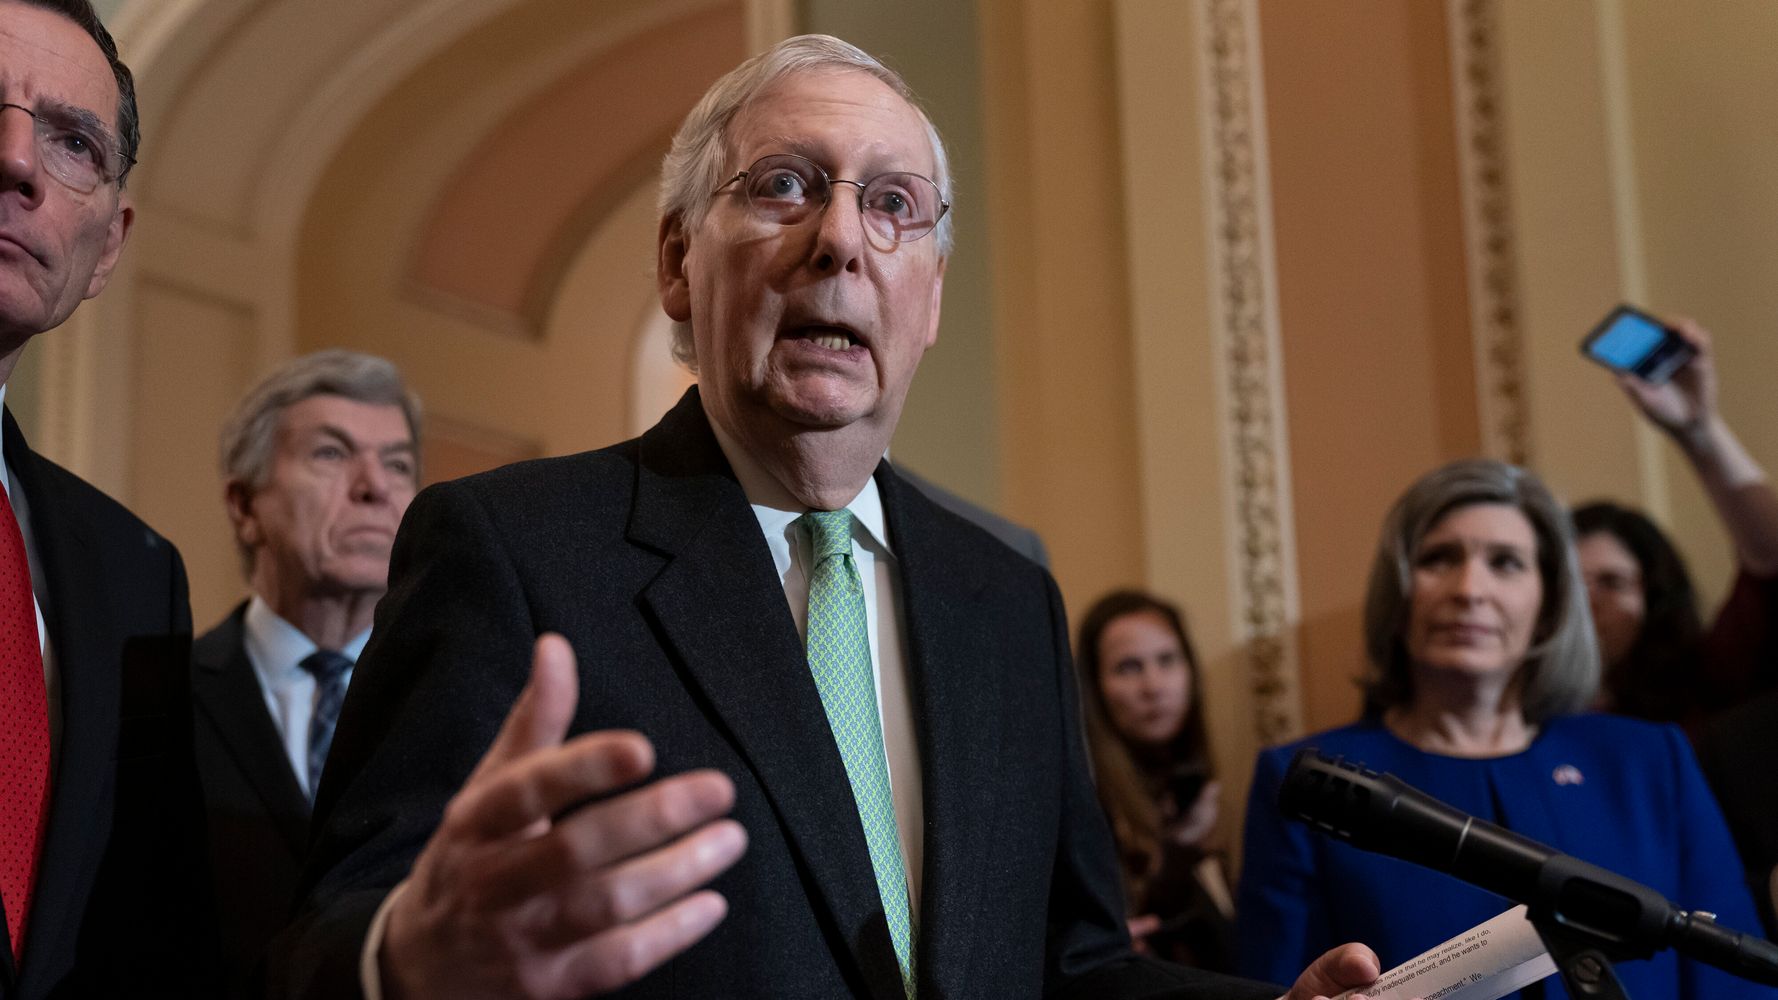 Mitch McConnell Blasts Impeachment As 'Rushed' And 'Unfair'